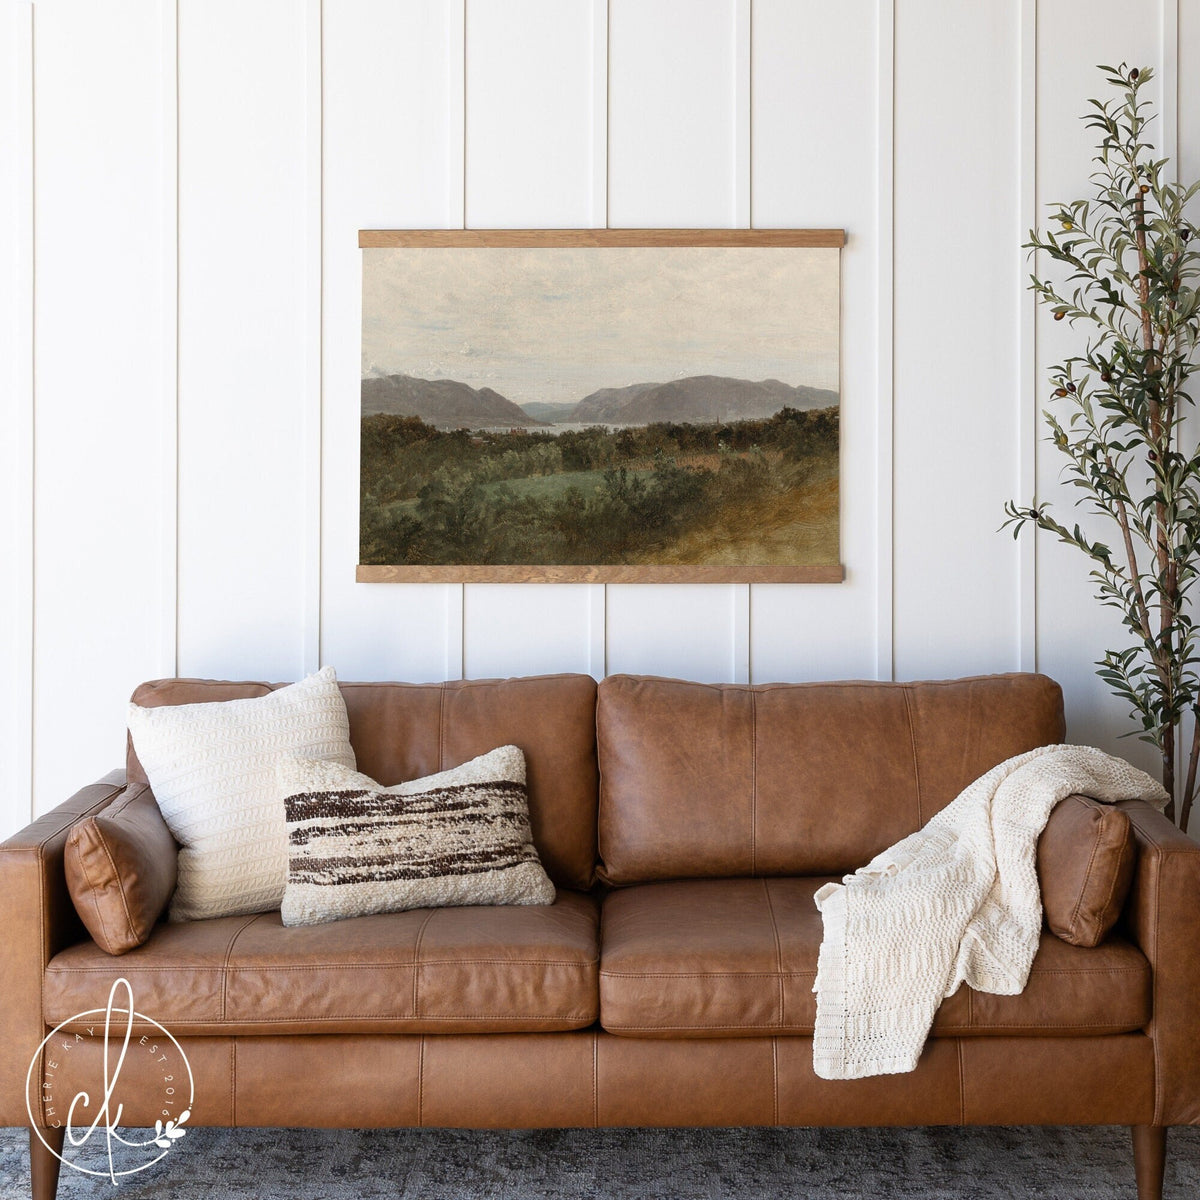 Vintage Landscape Tapestry | Landscape Painting | Farmhouse Wall Decor | Living Room Wall Decor | Vintage Wall Art